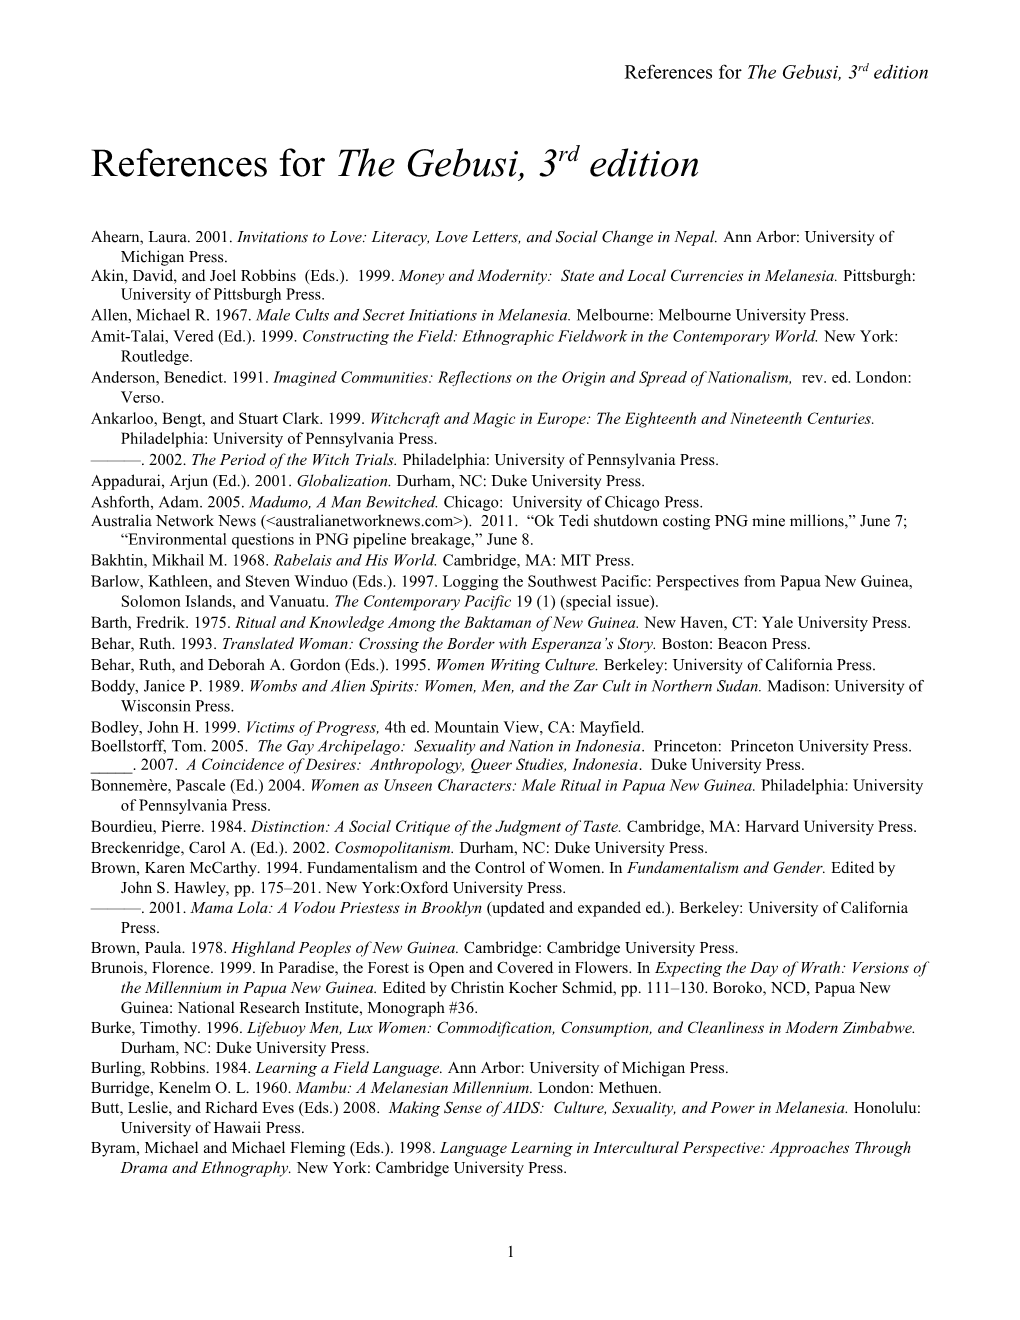 References for the Gebusi, 3Rd Edition